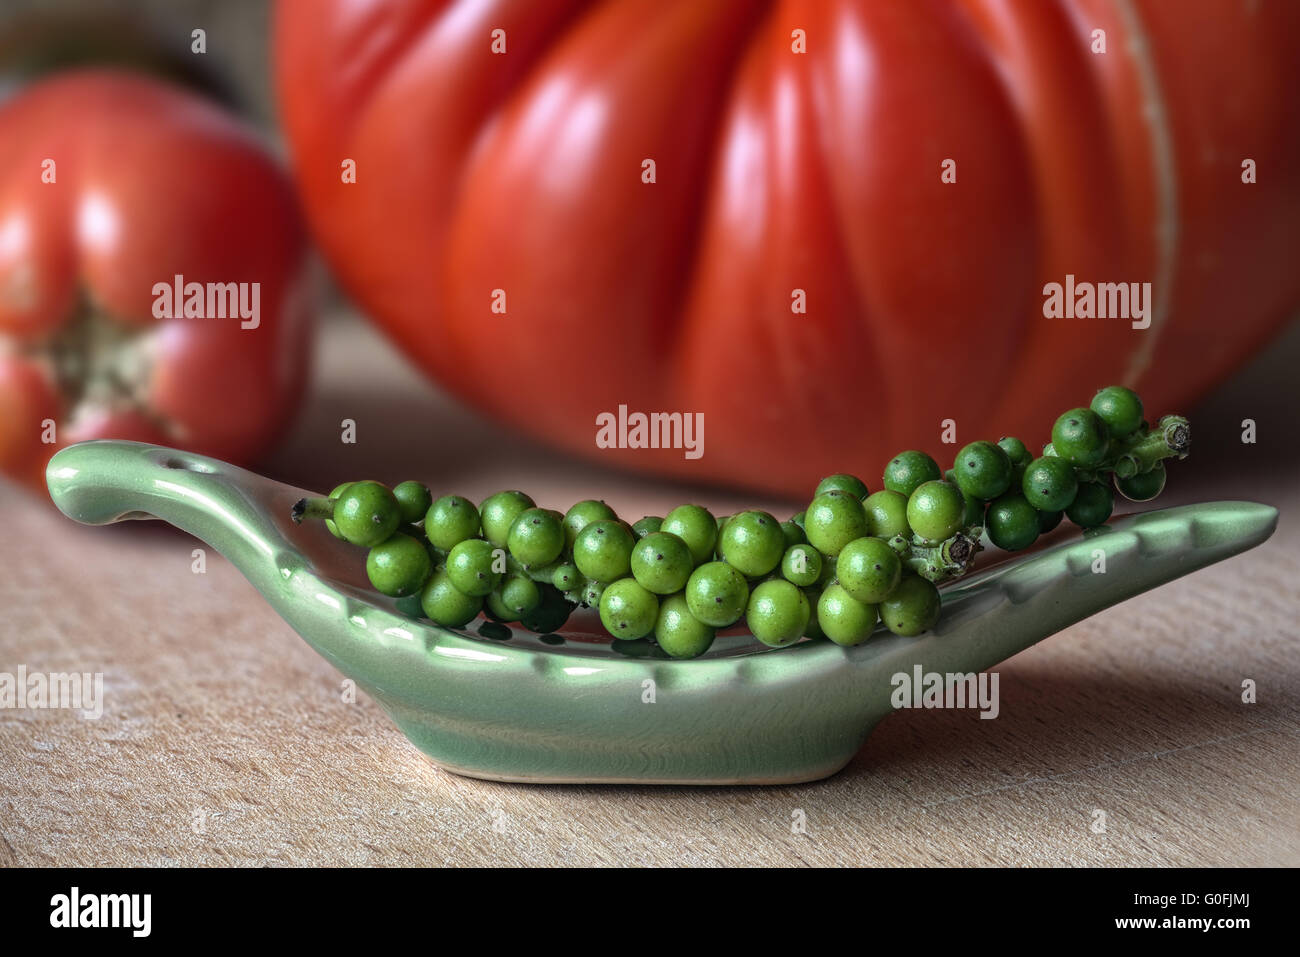 Green Pepper and Beef Tomatoes Stock Photo